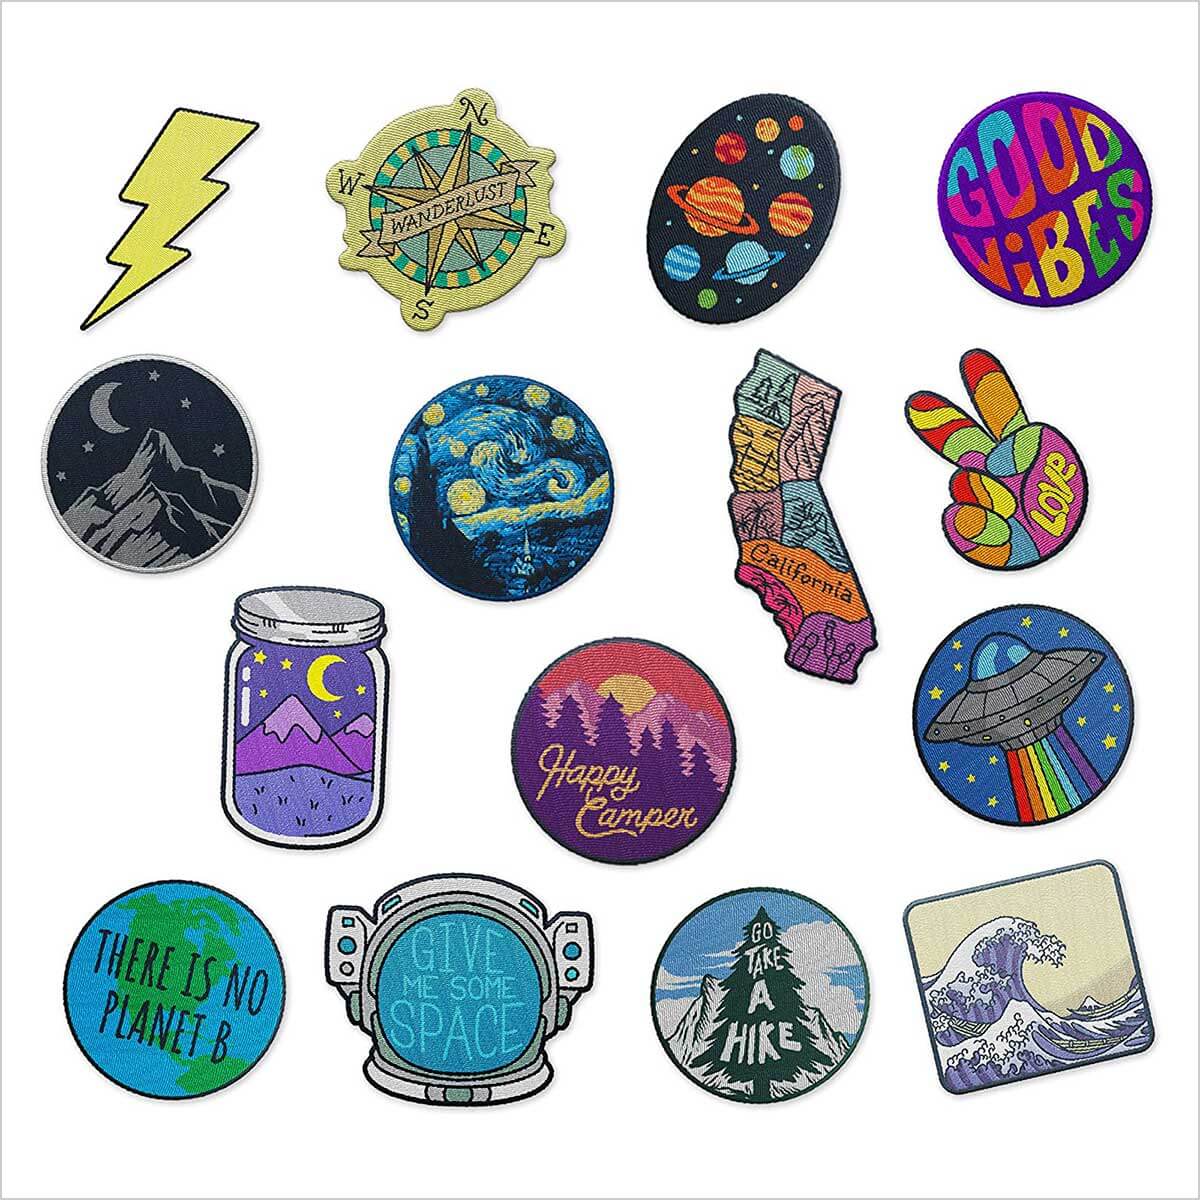 Assorted Cool Iron-On Patches for Jackets and UK